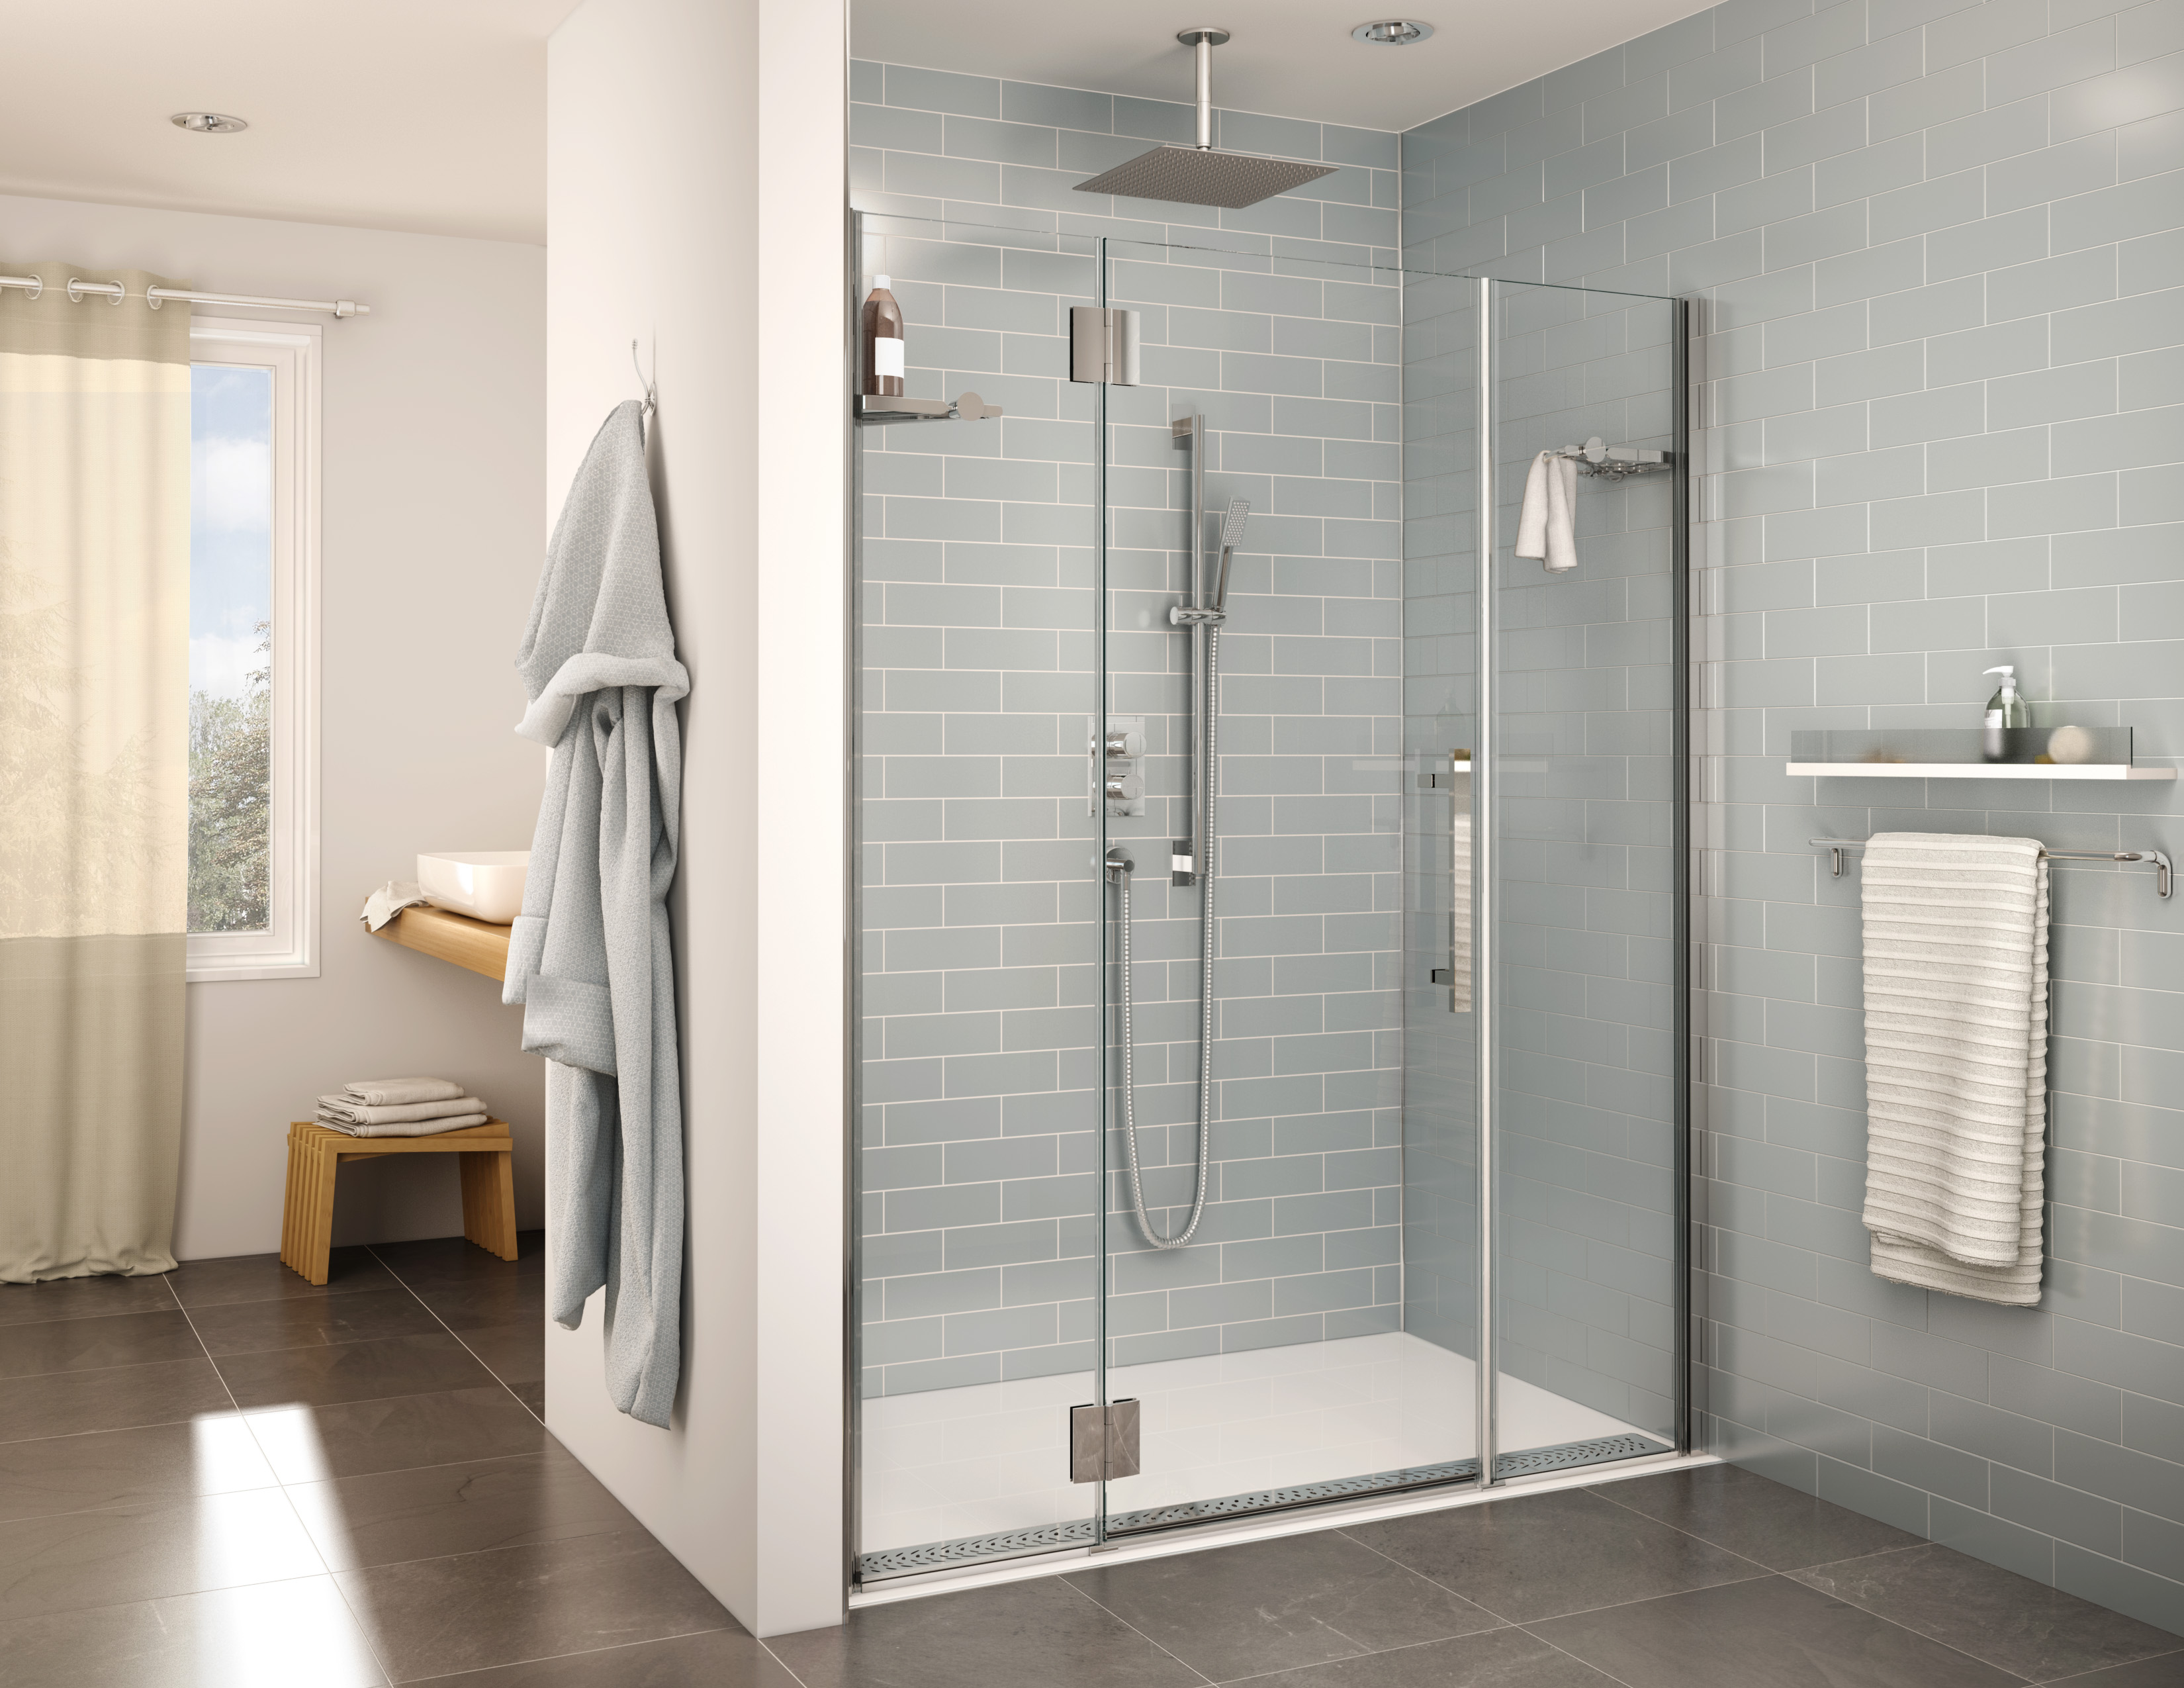 KPACKARXX37: Accessory Package for 63”x37” ADA Roll-In Showers